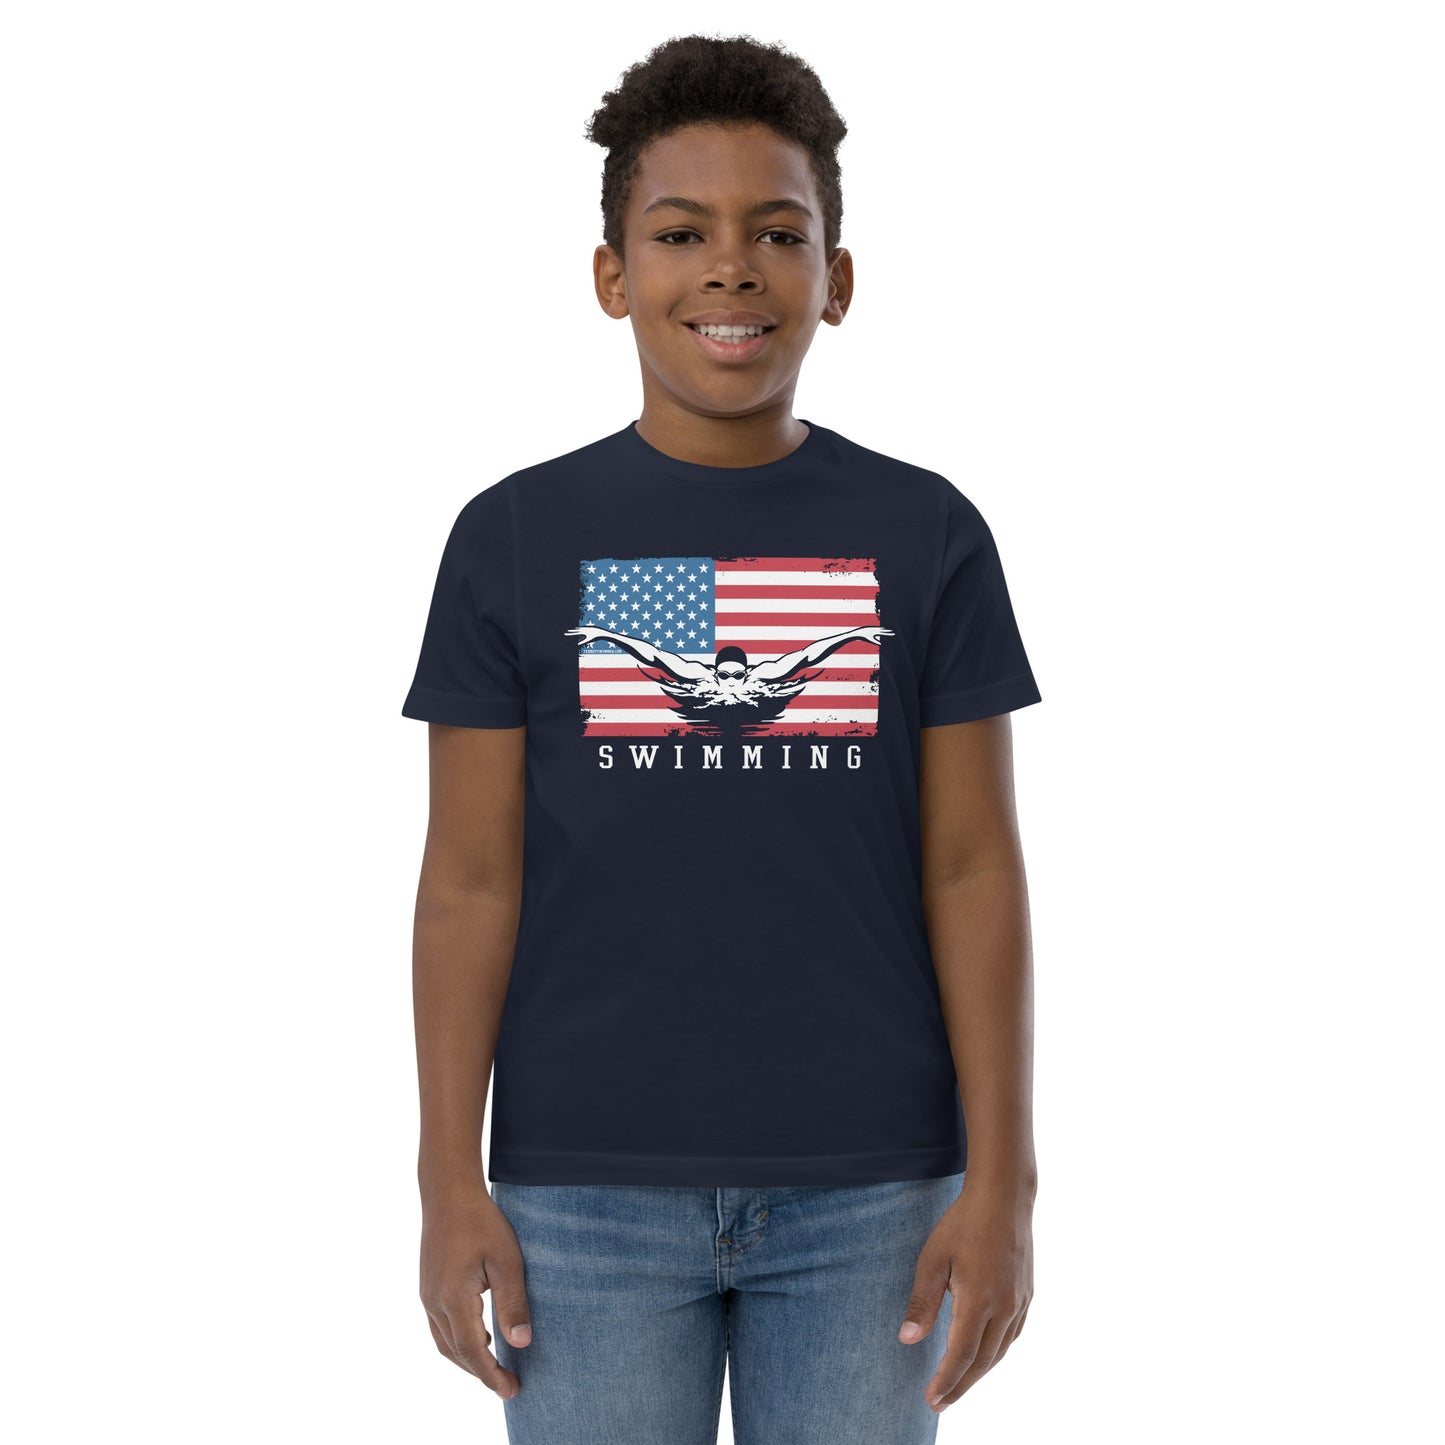 Youth Swimming USA T-shirt - TrendySwimmer